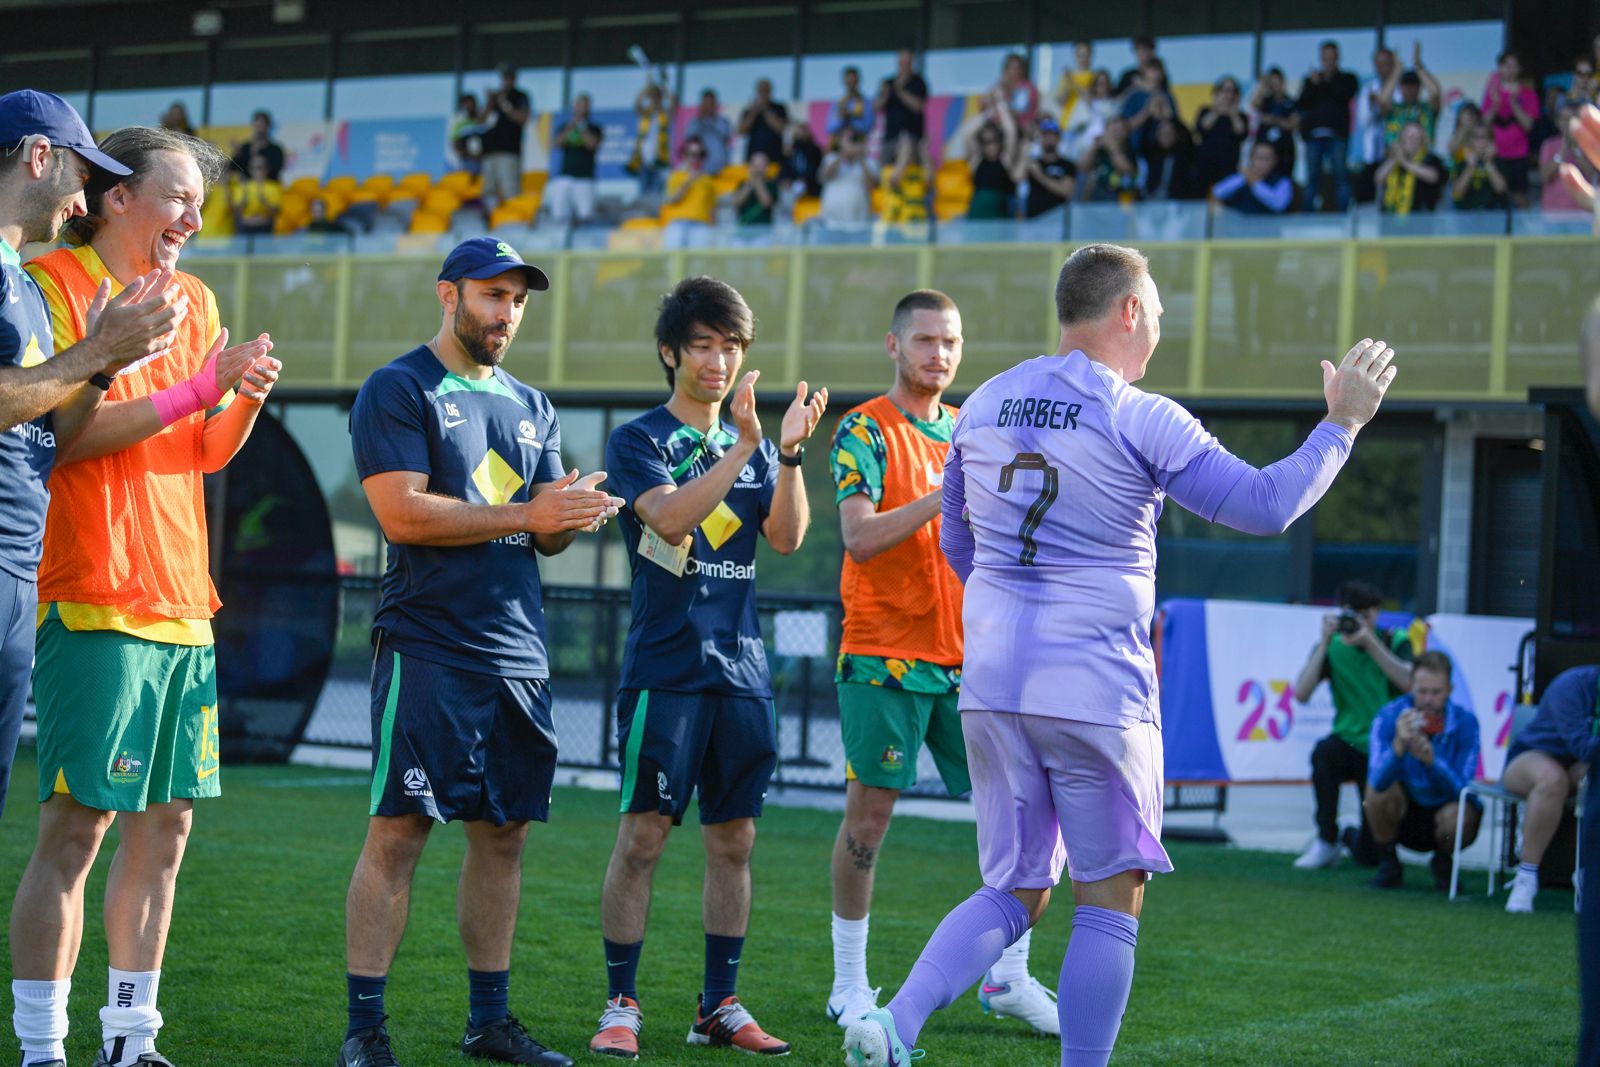 David Barber walks off the pitch to applause in his 110th appearance for the CommBank Pararoos